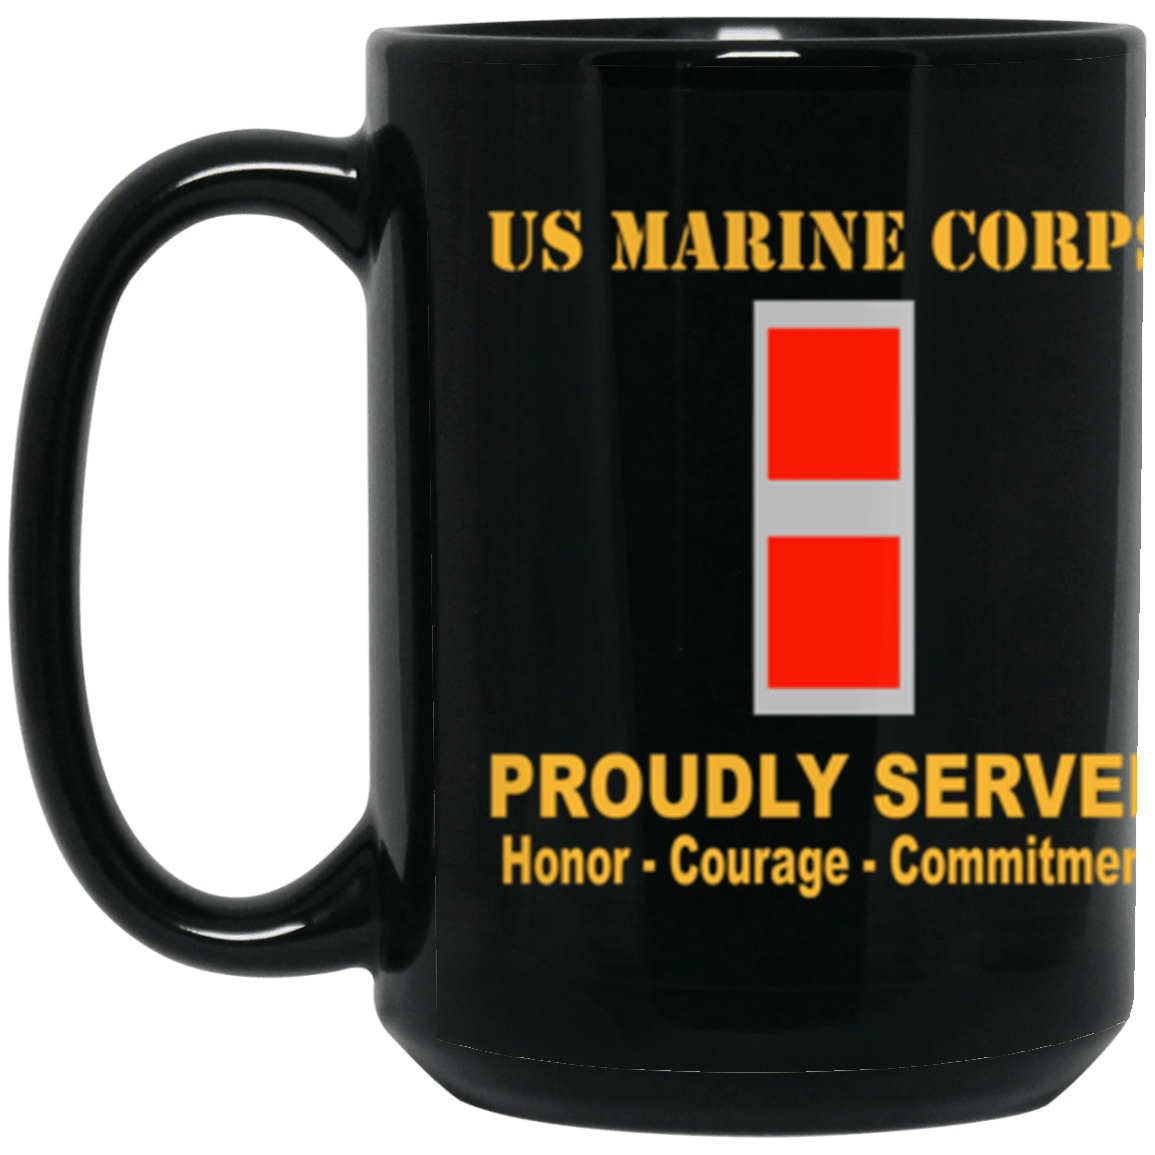 USMC W-3 Chief Warrant Officer 3 CW3 CW3 Warrant Officer Ranks Proudly Served Core Values 15 oz. Black Mug